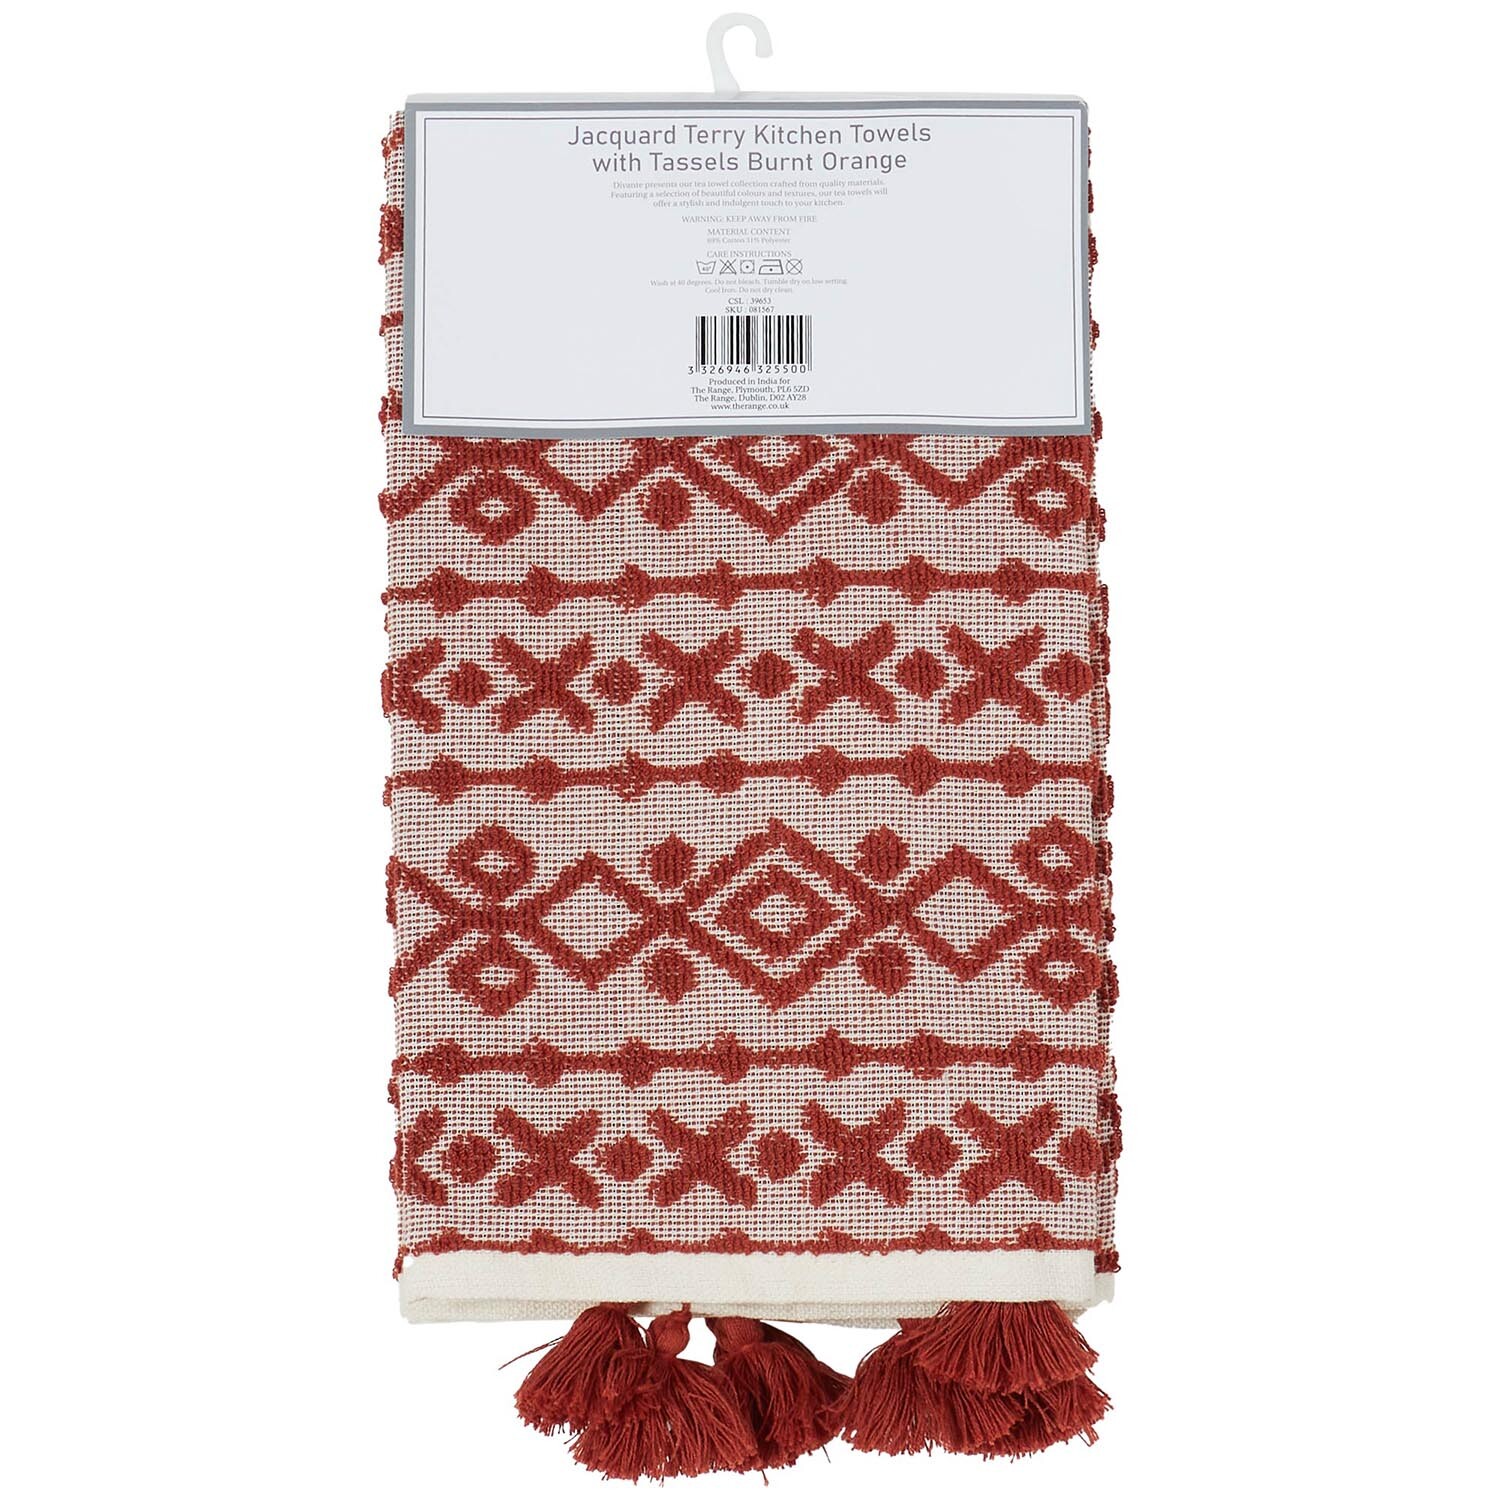 Pack of 2 Jacquard Terry Kitchen Towels with Tassels - Burnt Orange Image 1